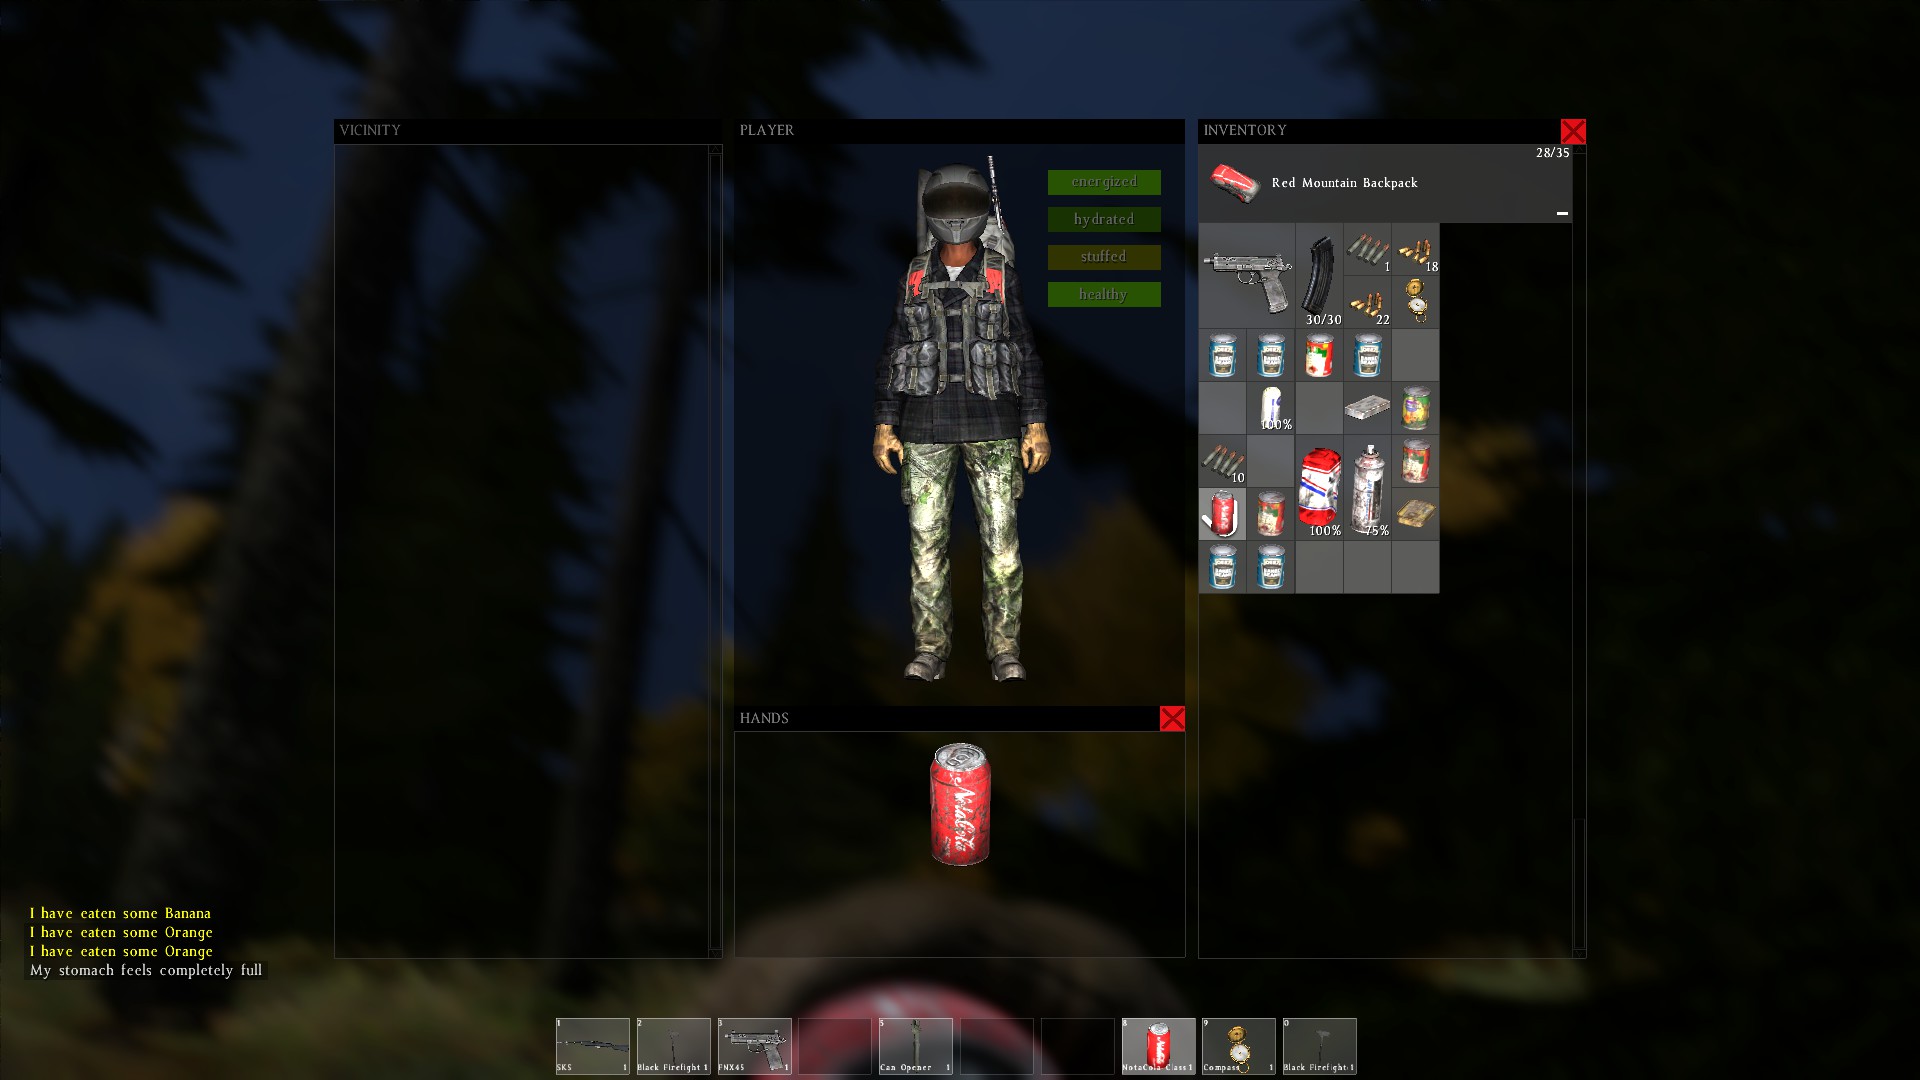 Alleged screenshots of cancelled DayZ 2 game surface online